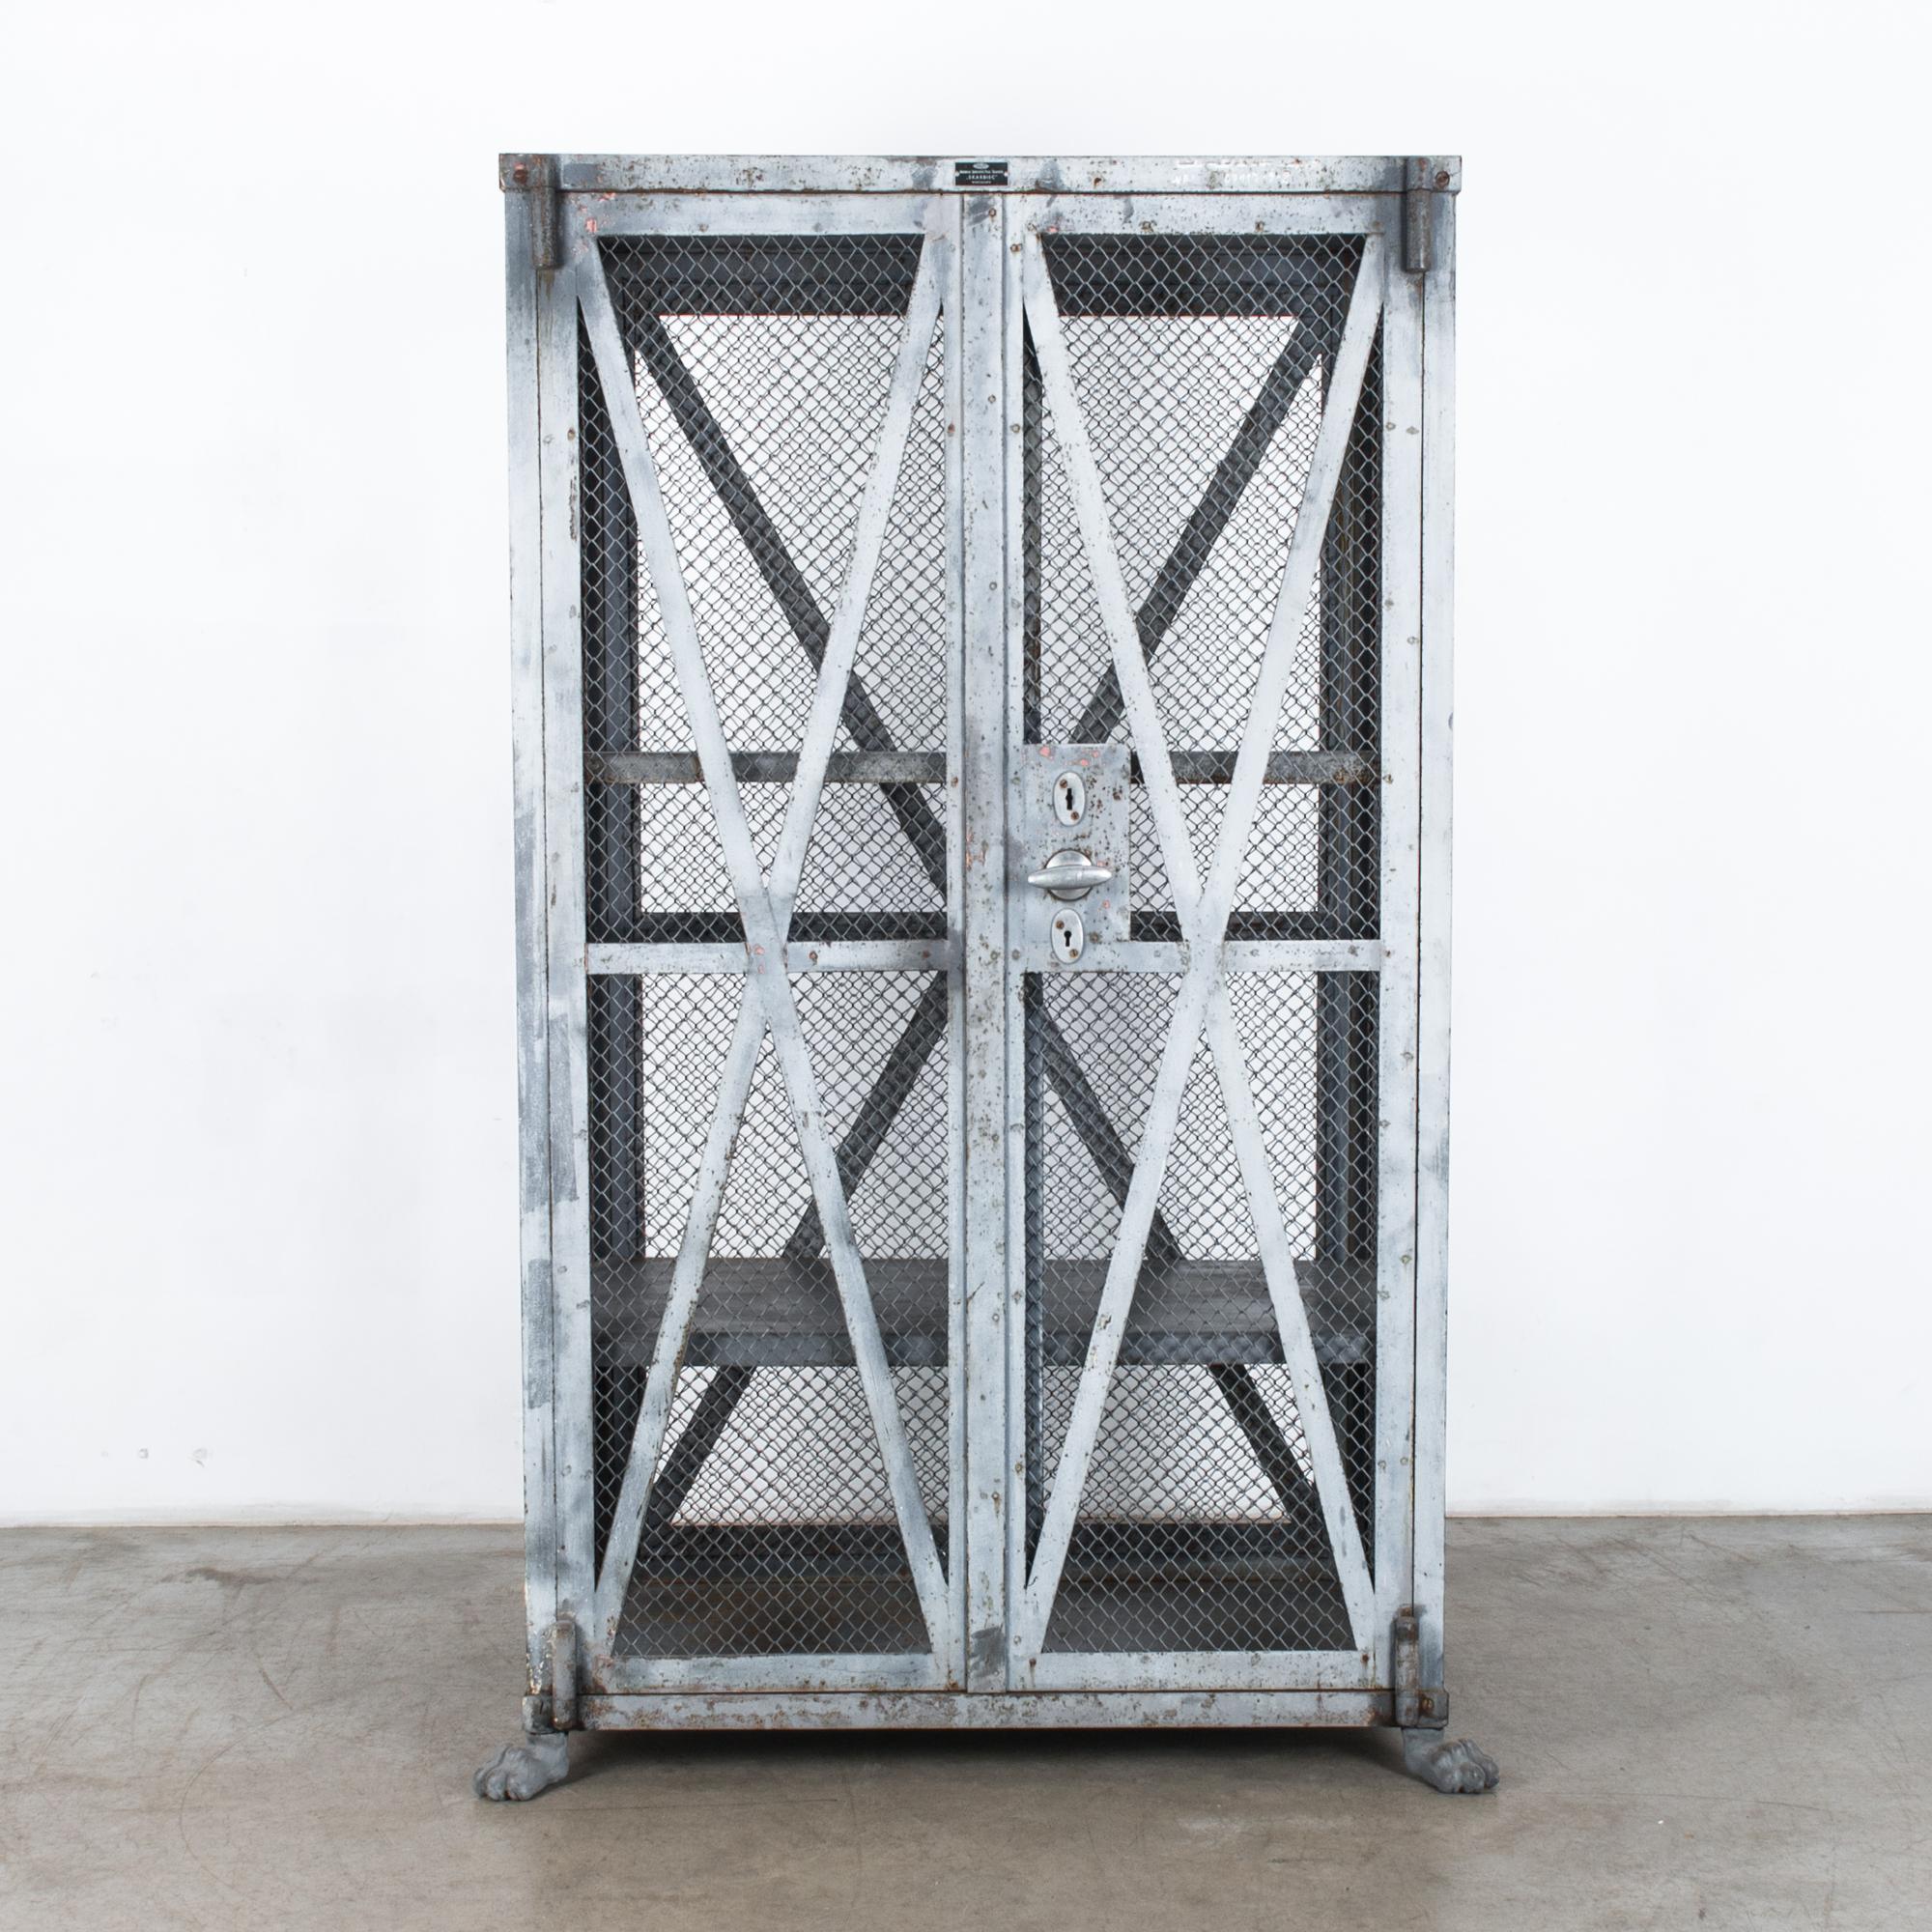 This metal safe was produced by “Skarbiec,” circa 1930. A tall cage of wire mesh, reinforced with metal bars, contains two shelves. Claw feet at the base lend a noble touch to the stark silhouette. The striking X-shaped bars and double lock on the